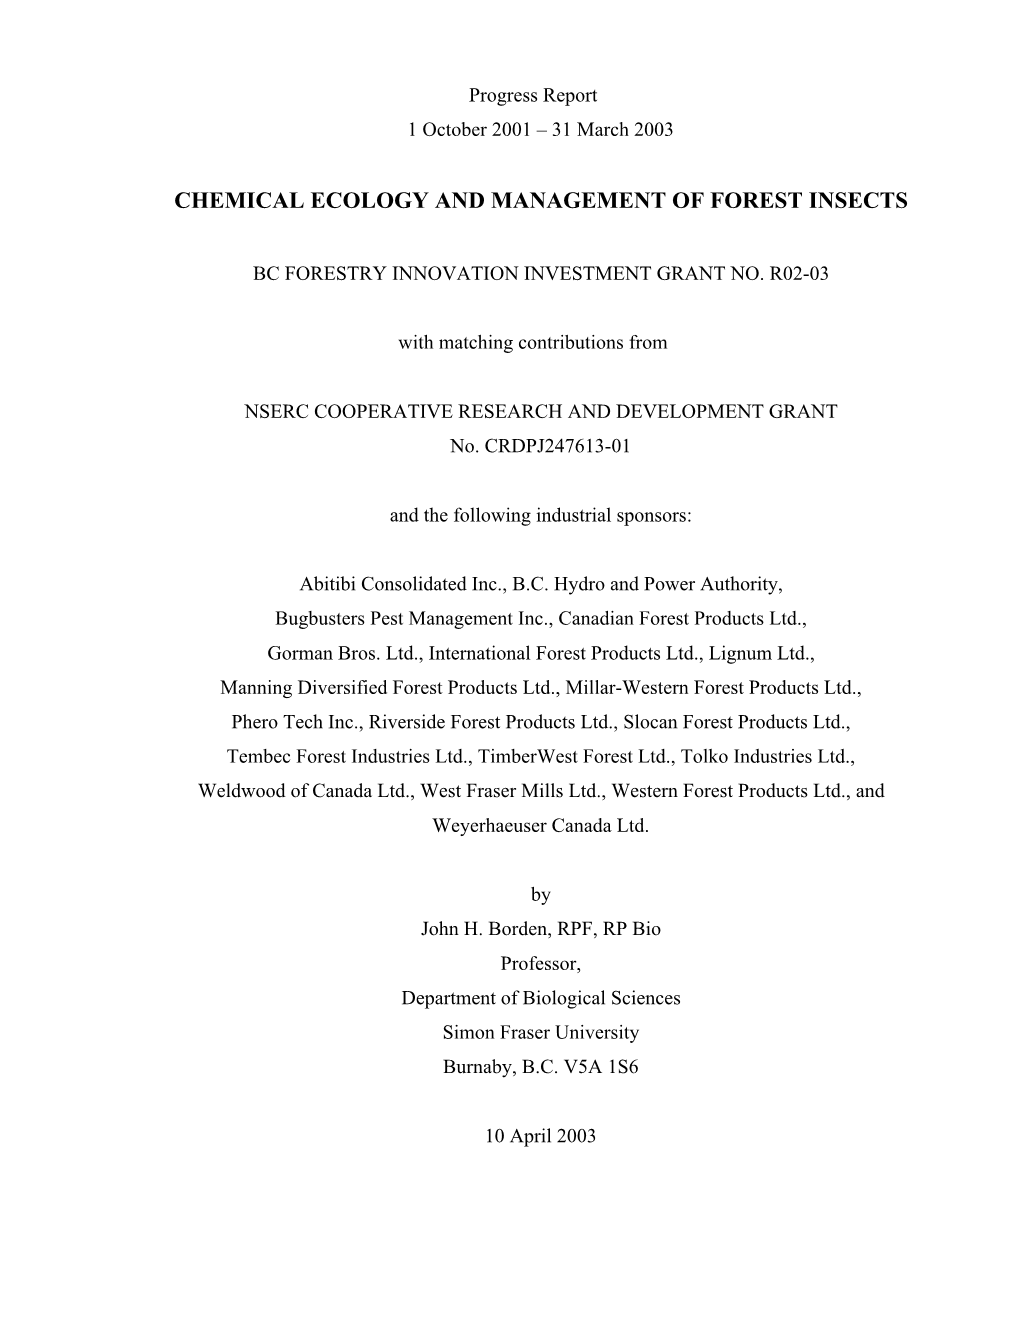 Chemical Ecology and Management of Forest Insects